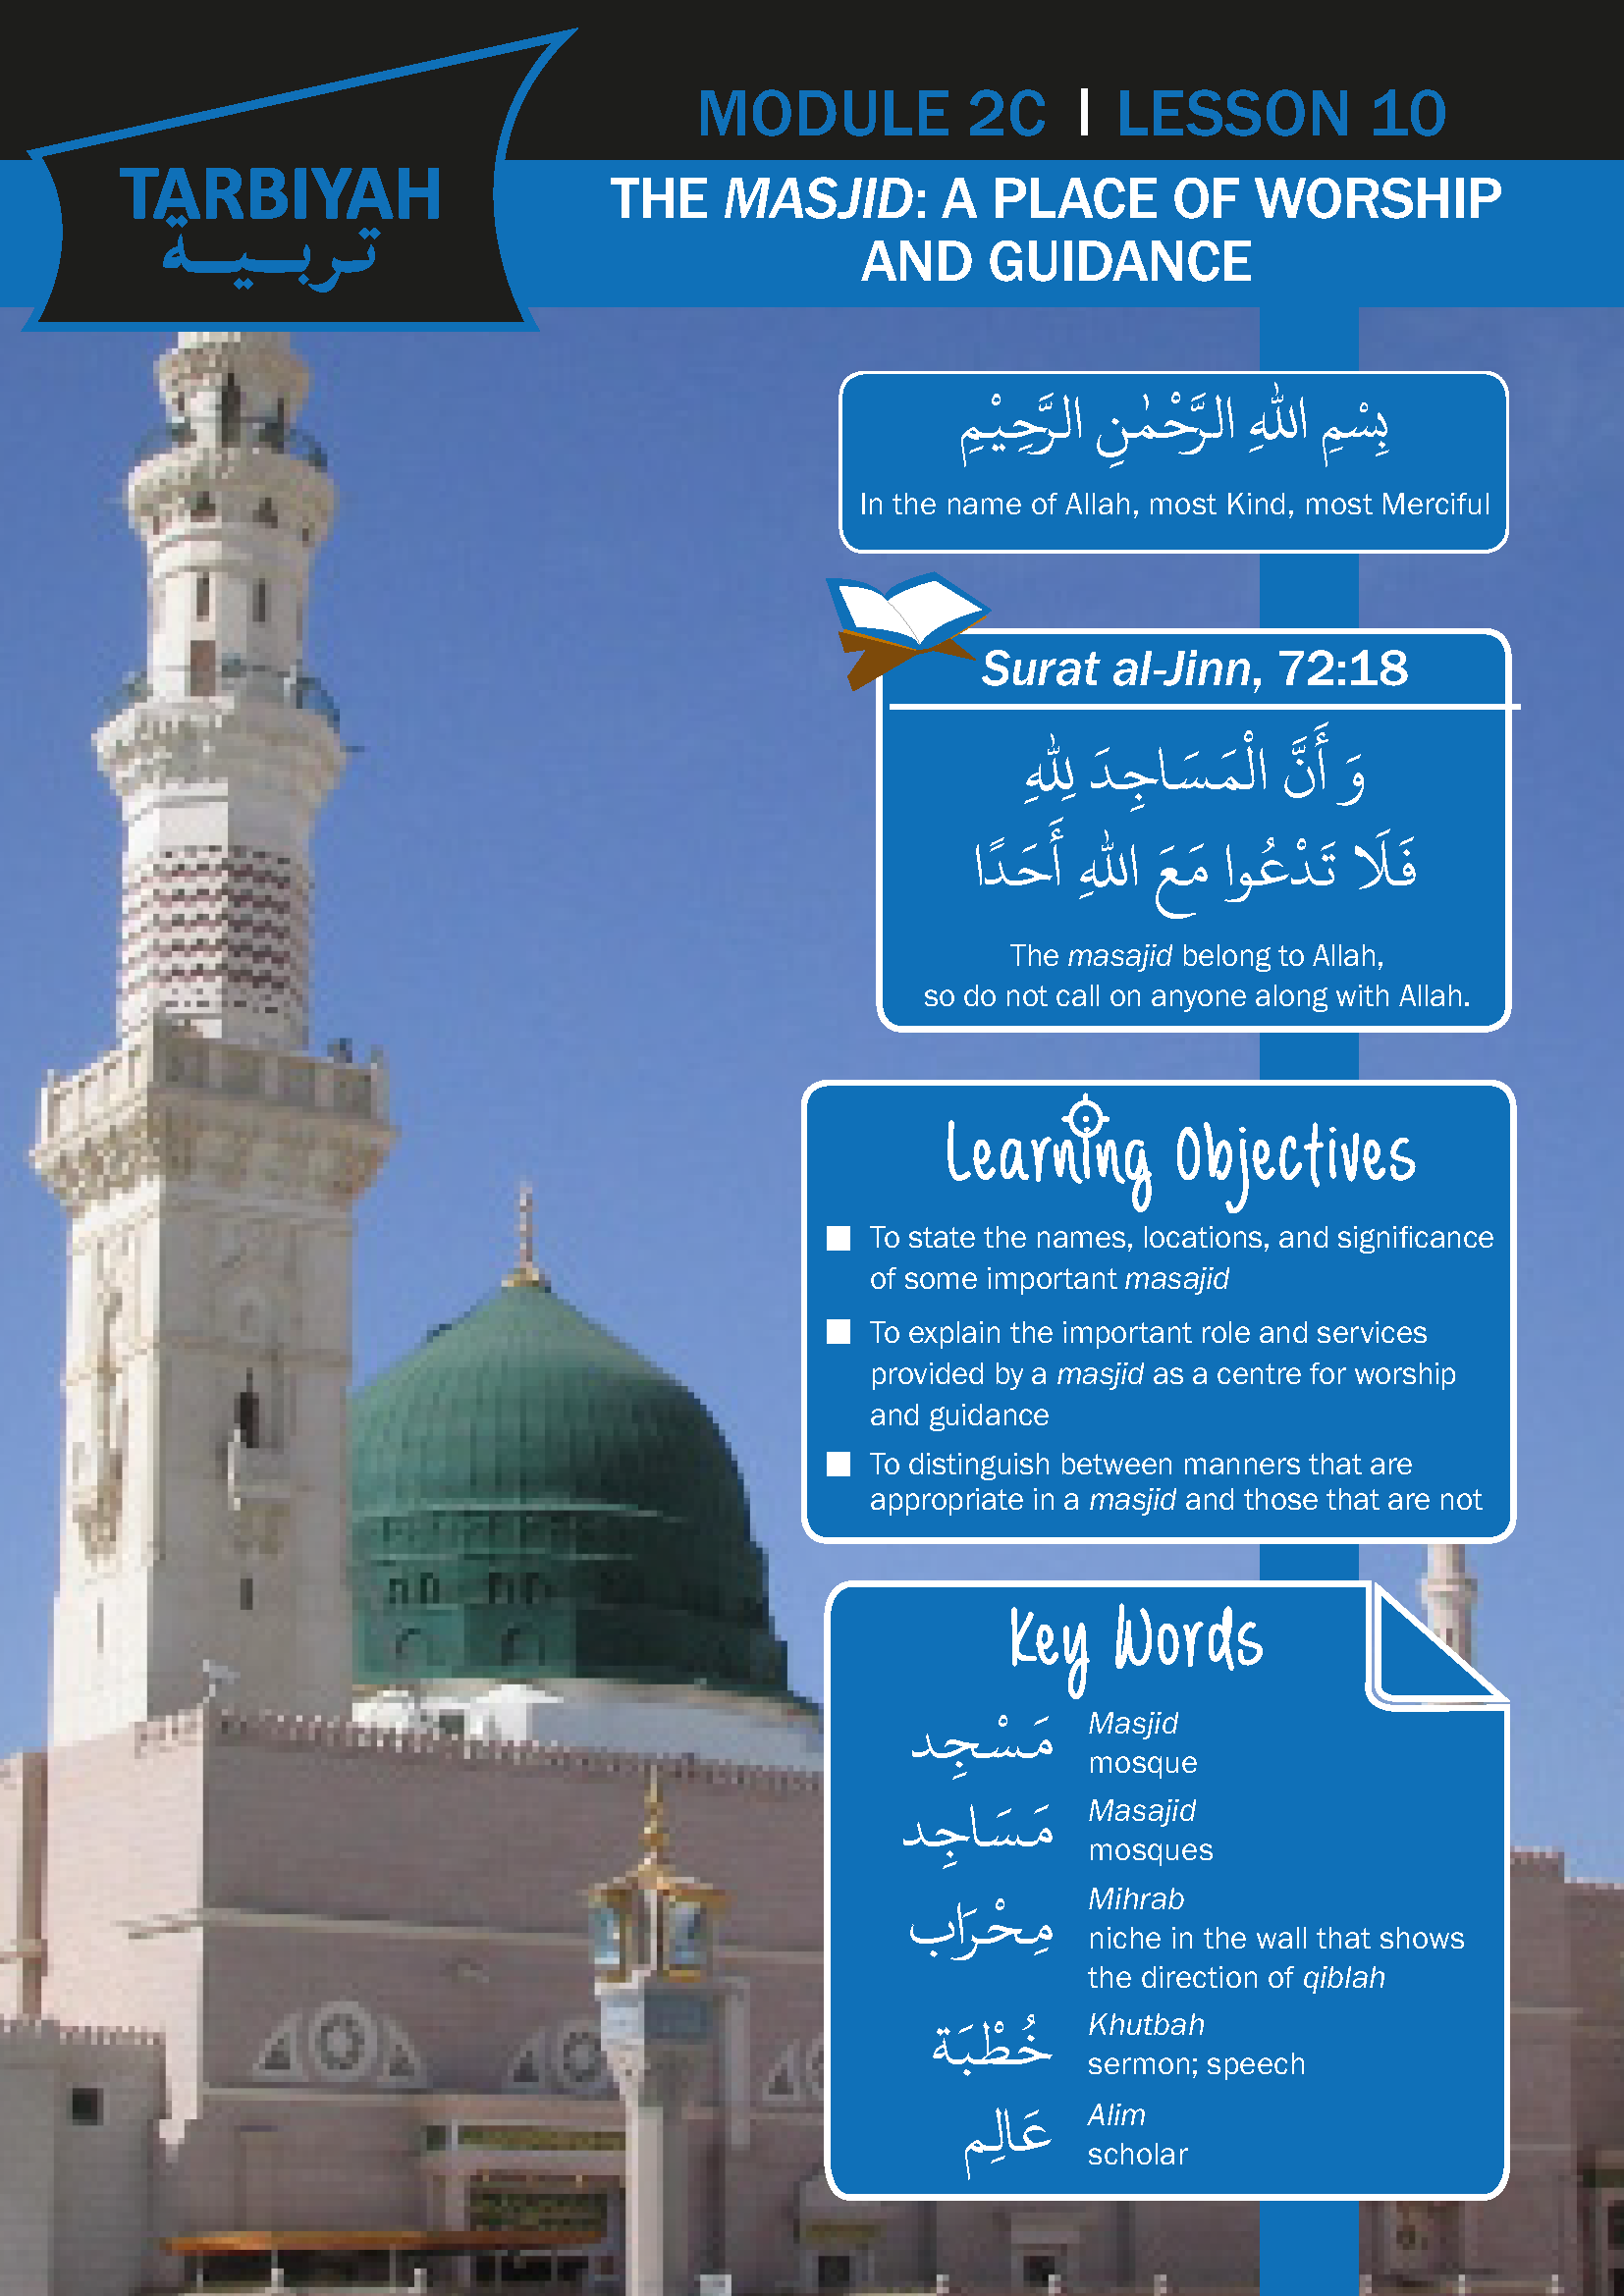 2C10 – THE MASJID: A PLACE OF WORSHIP